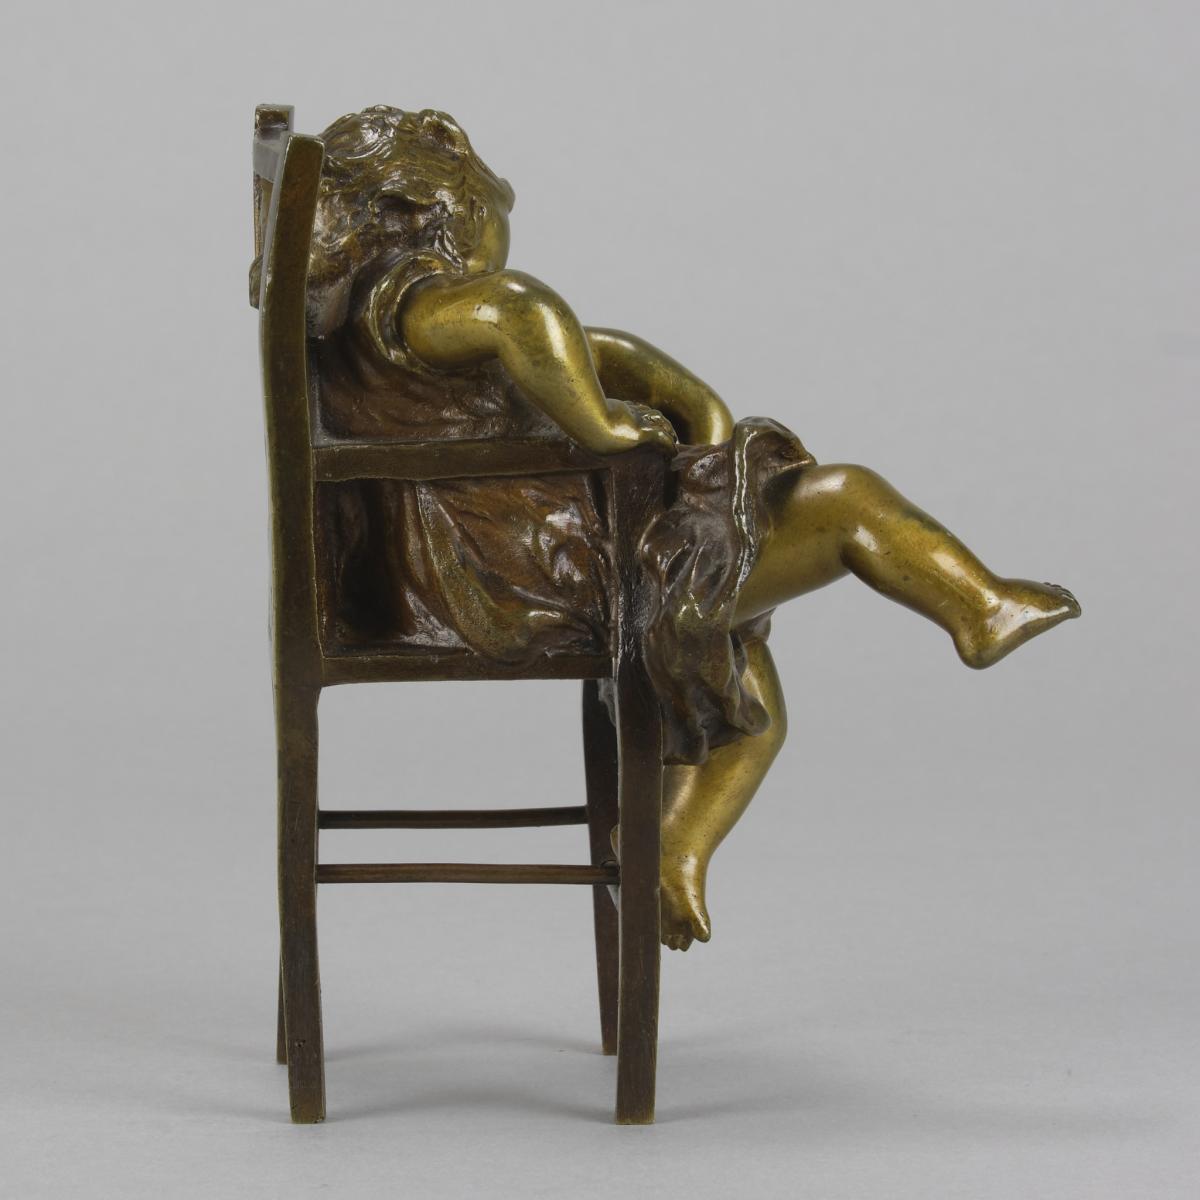 Early 20th Century Spanish Bronze Entitled "Girl on Chair" by Juan Clara